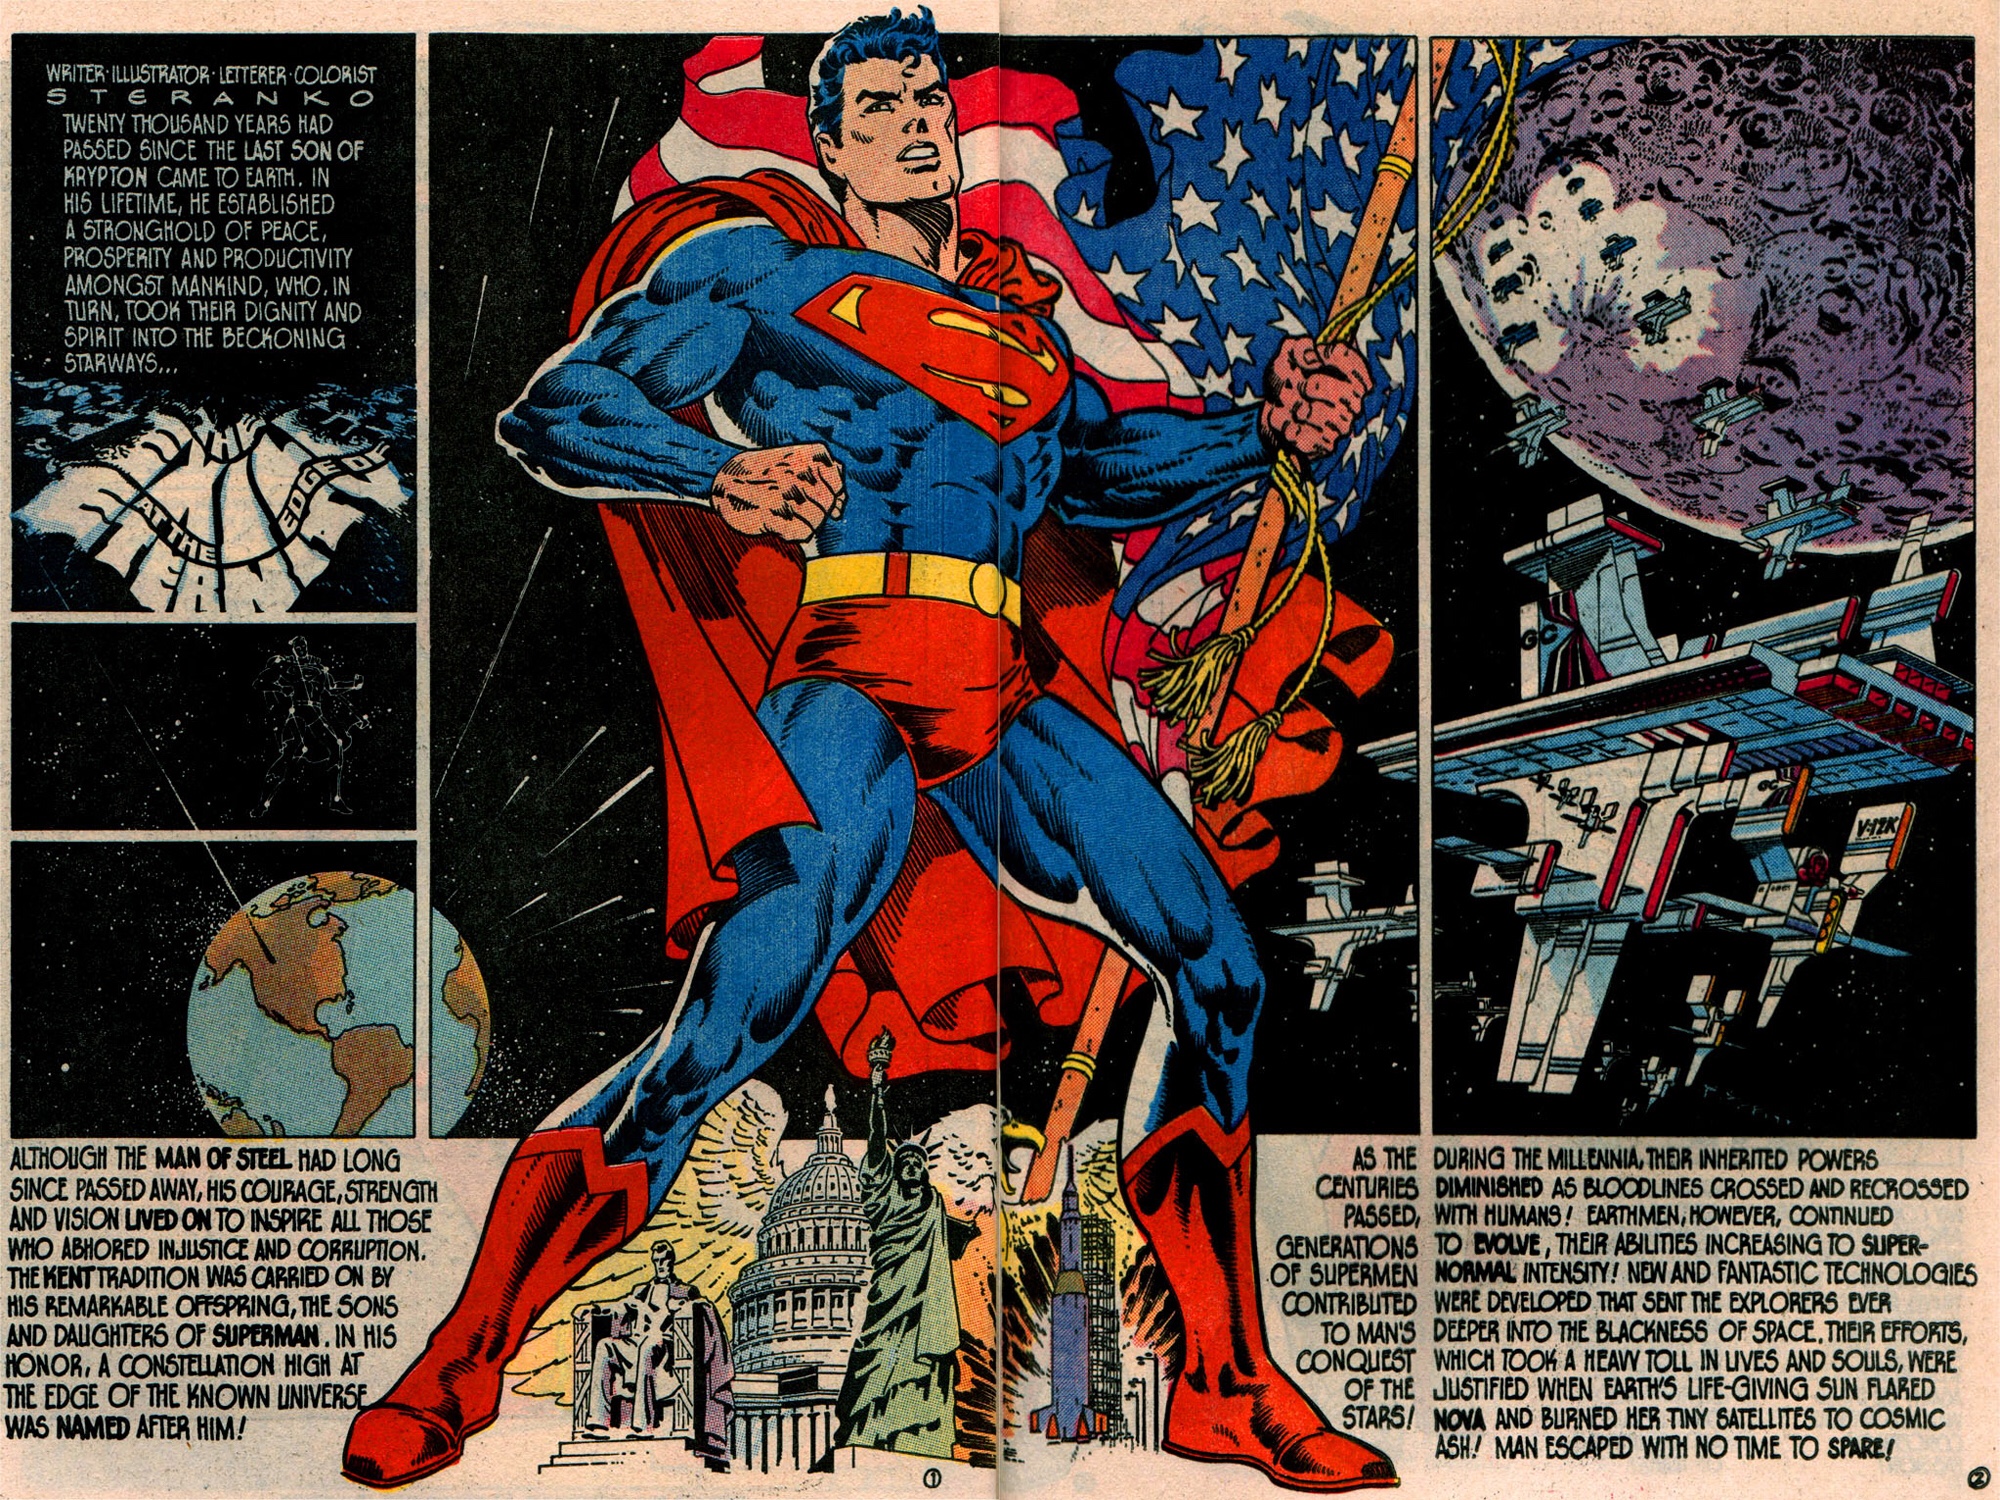 Superman by Jim Steranko - from Superman #400